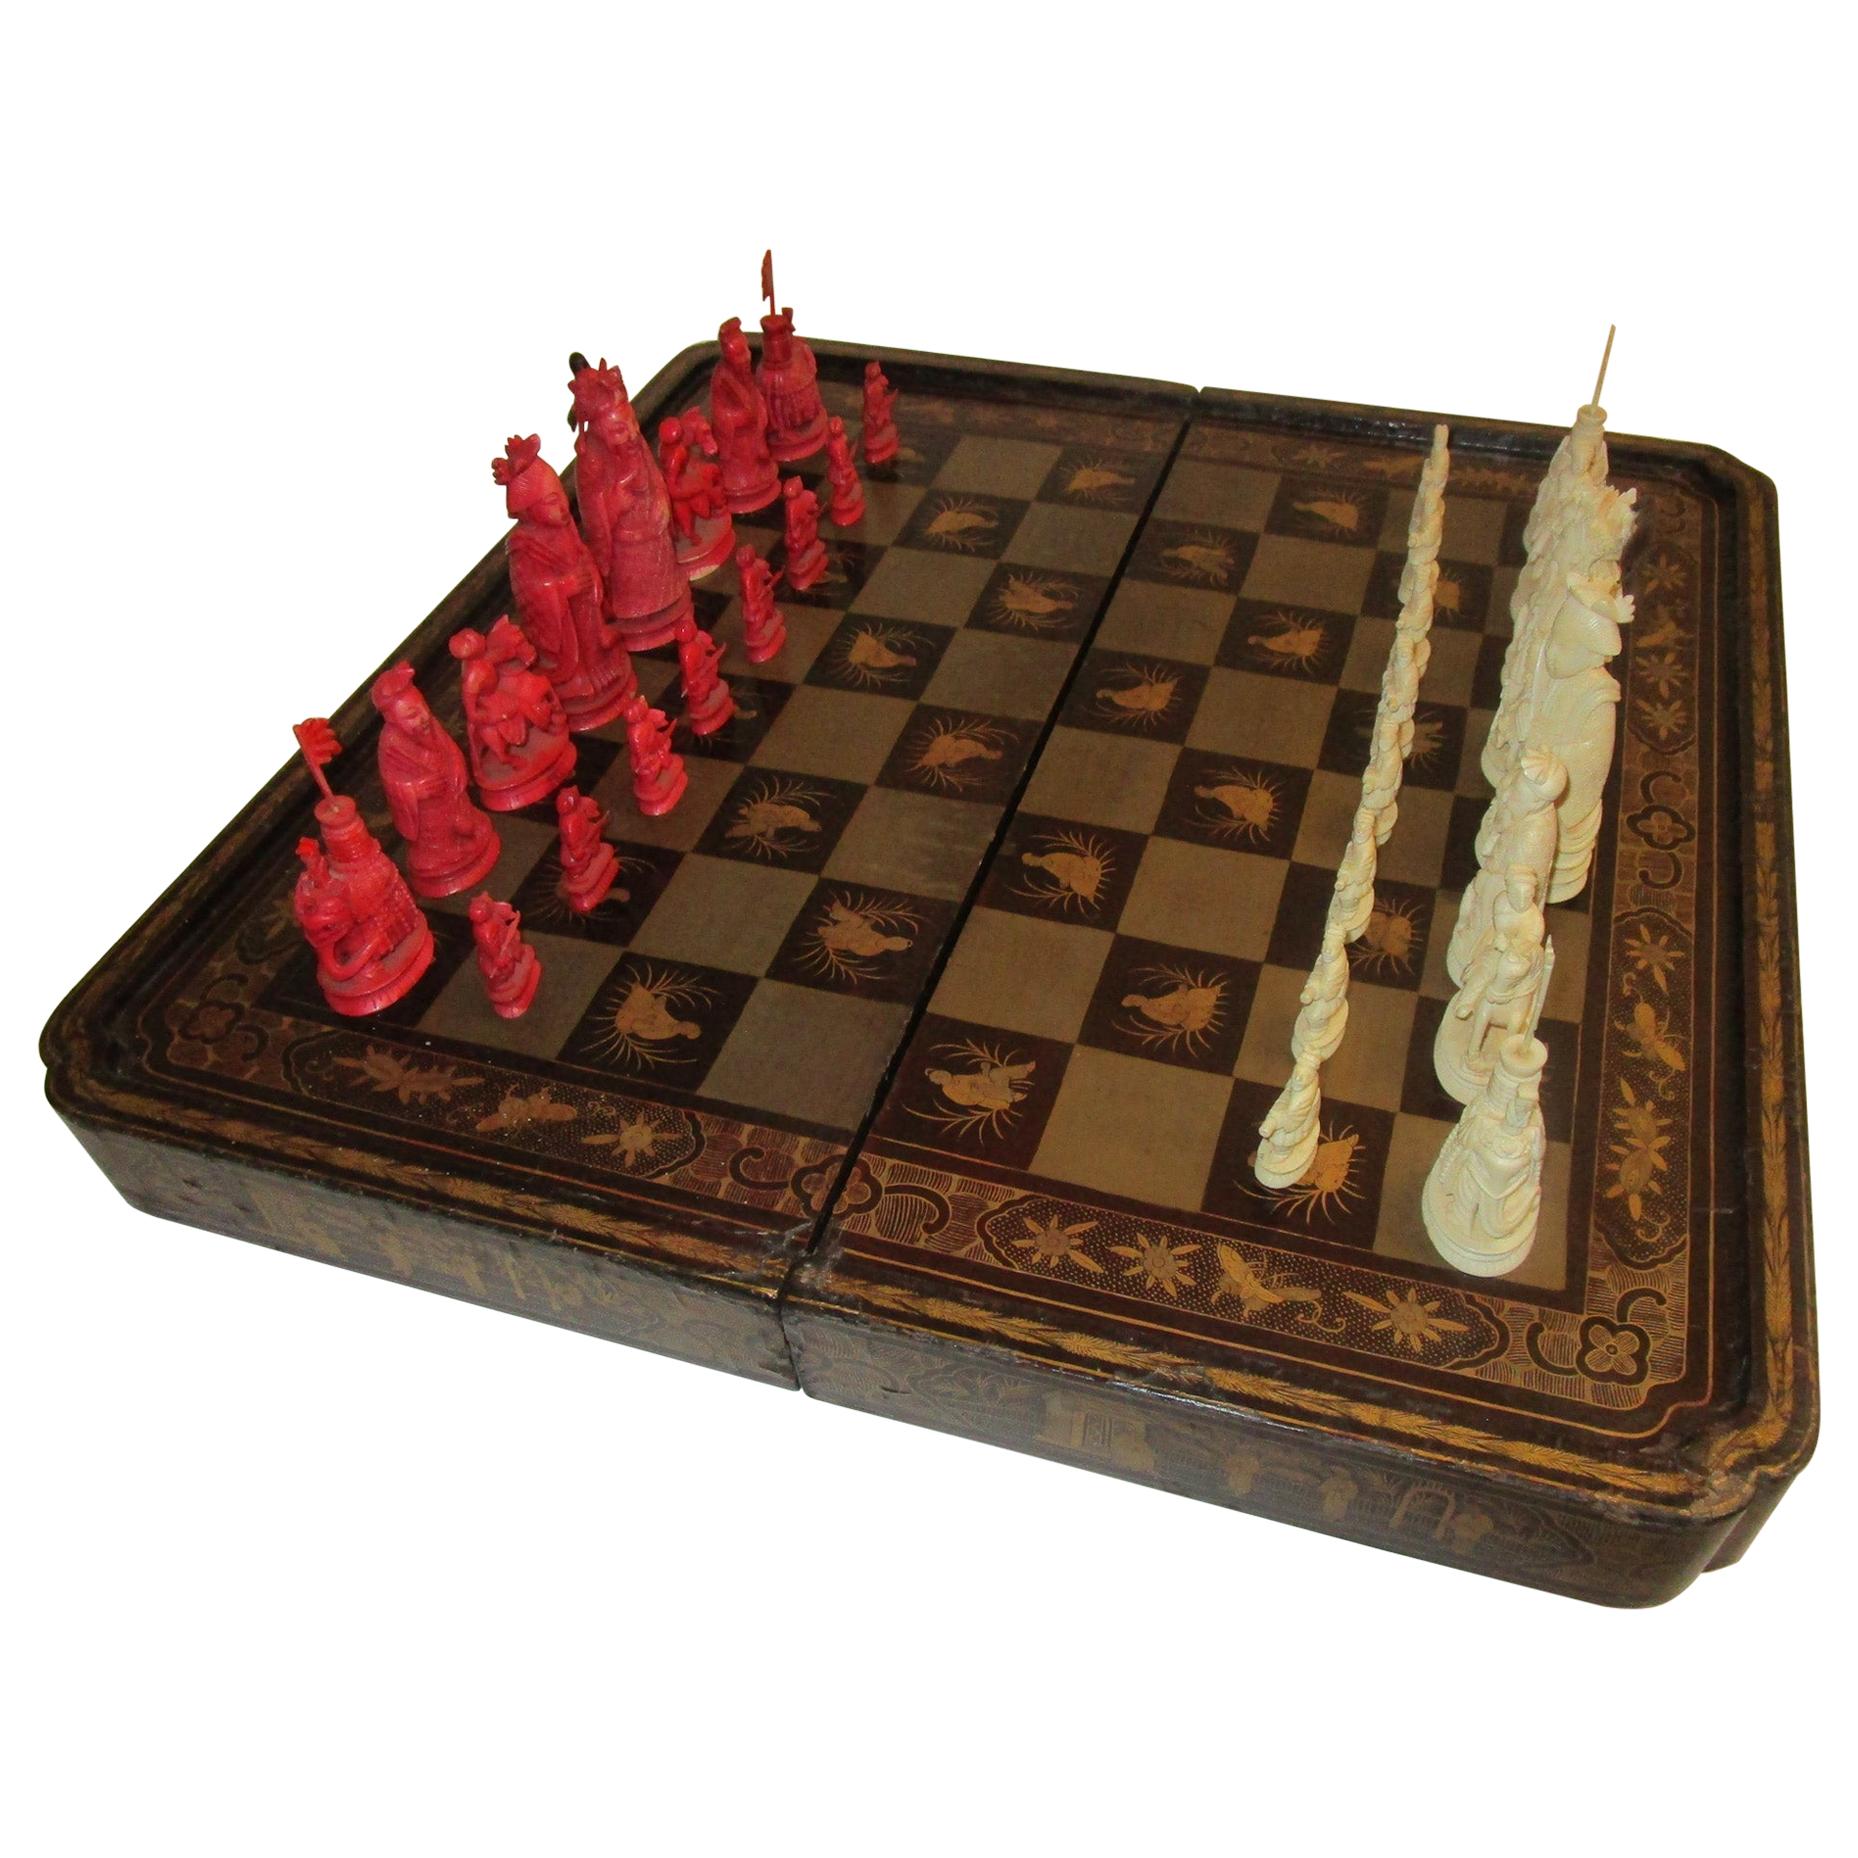 Details about   Vintage Antique Wooden Folding Chess Set Gift Warrior Board Pieces Carved 